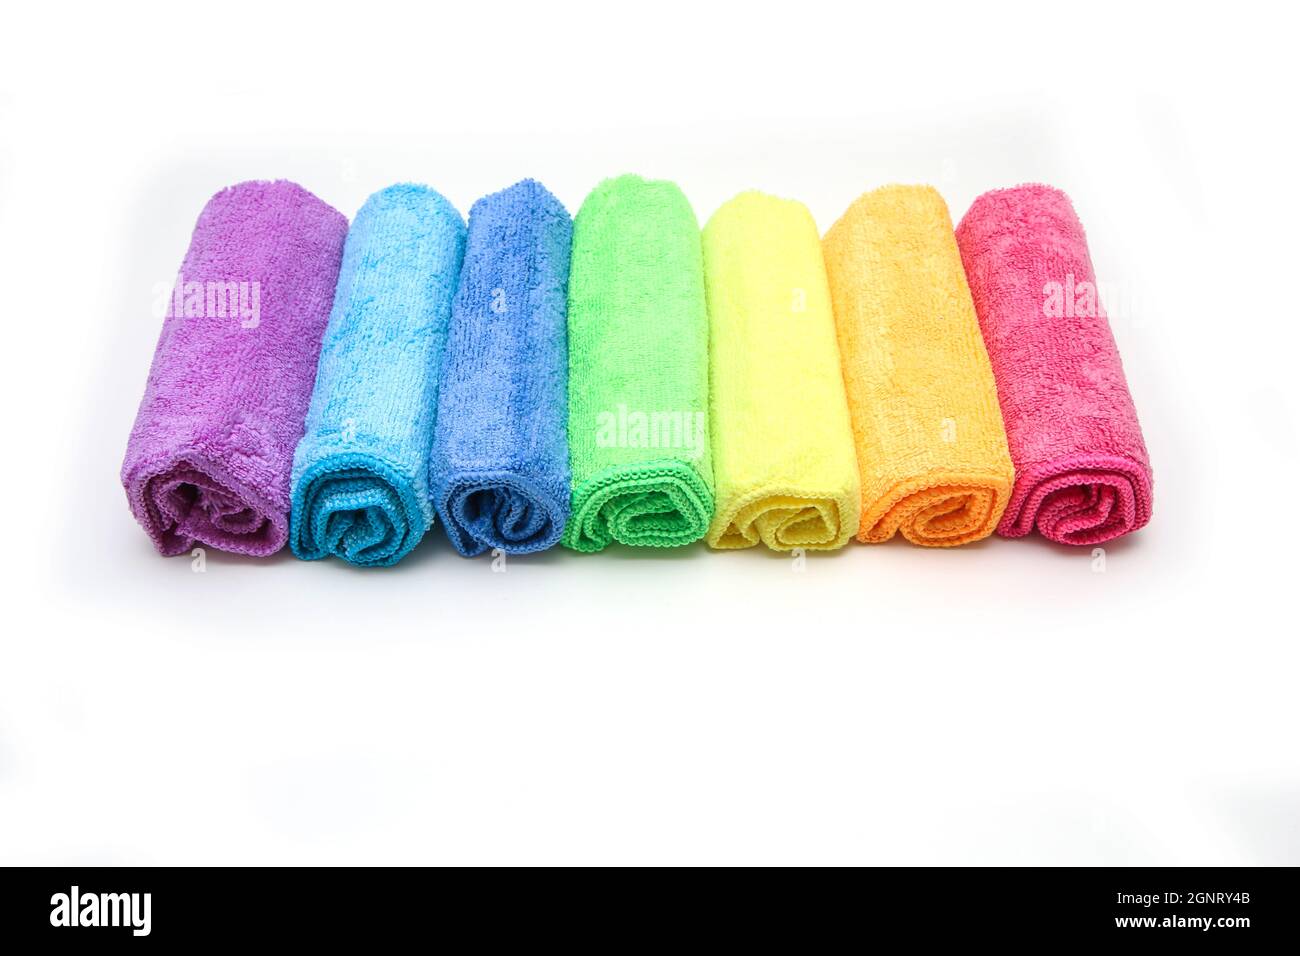 The row of the different colorful micro fibre rags ordered in a white background. Stock Photo